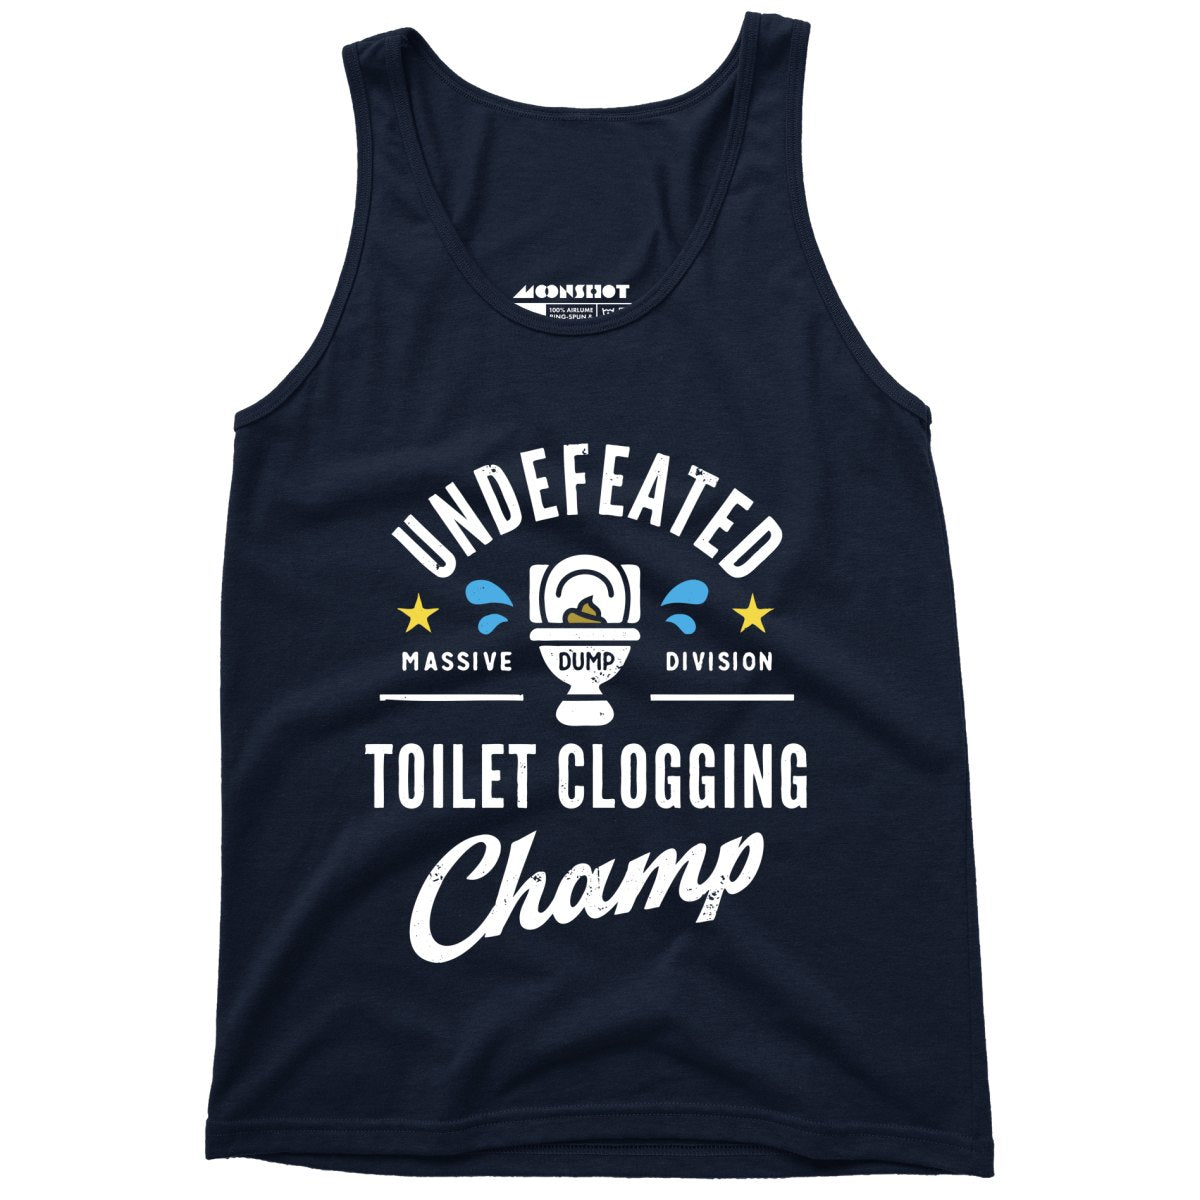 Undefeated Toilet Clogging Champ - Unisex Tank Top